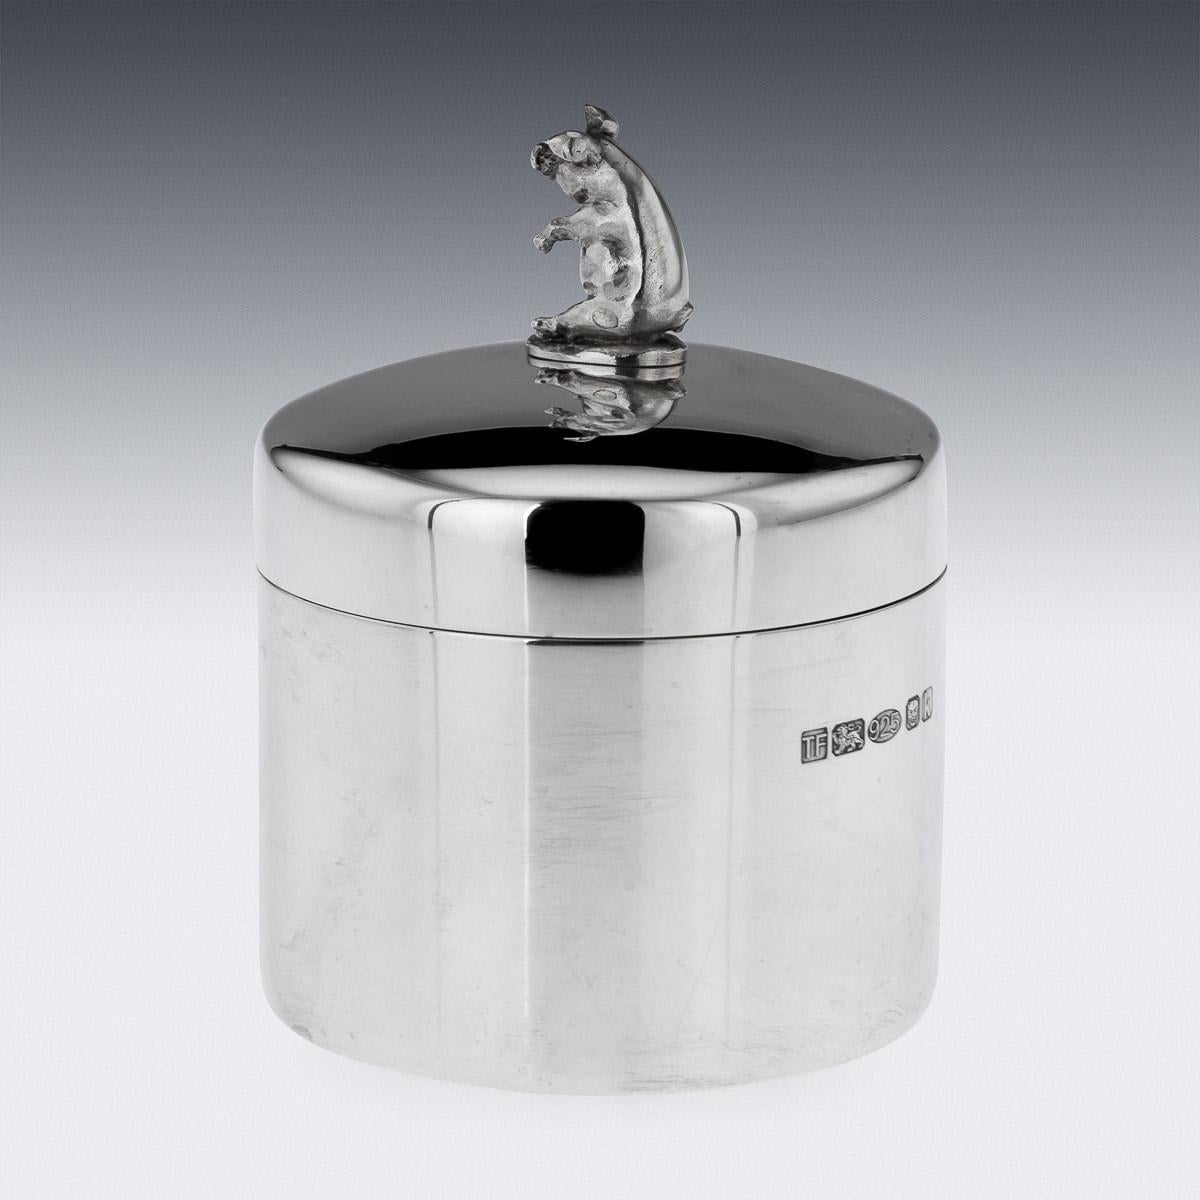 An early 21st century novelty solid silver 